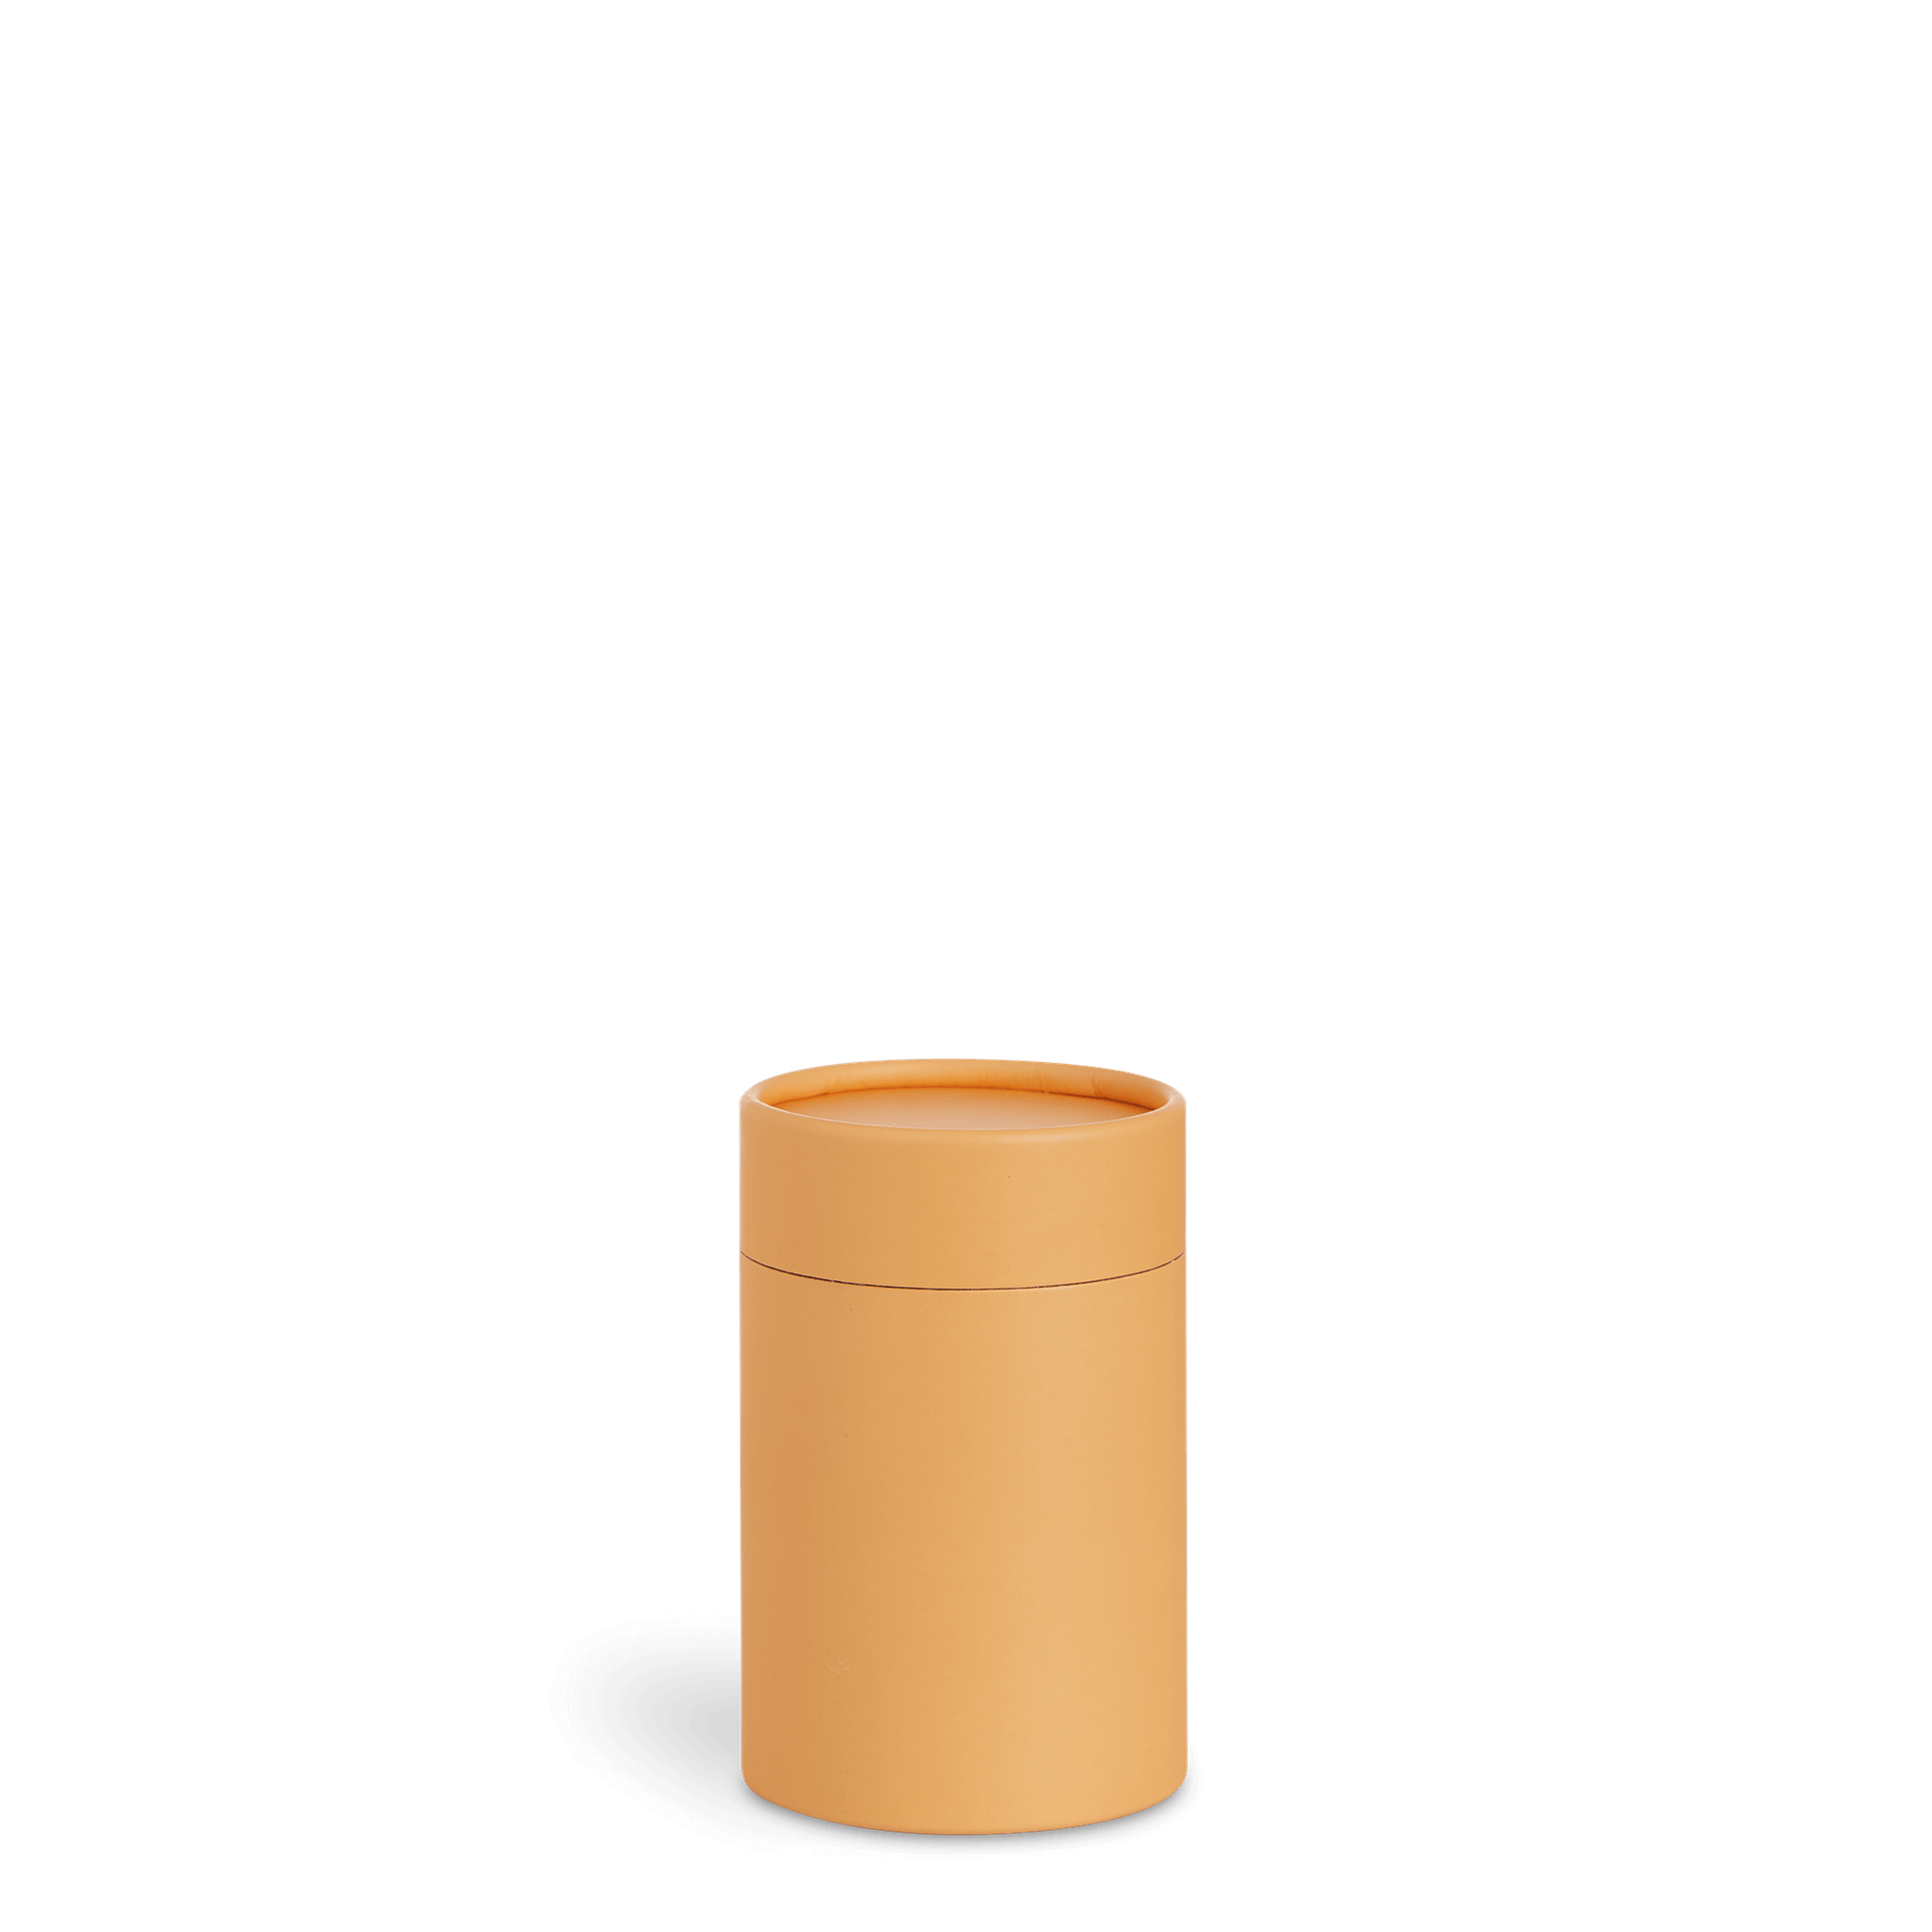 Recyclable Three-Piece Cylinders